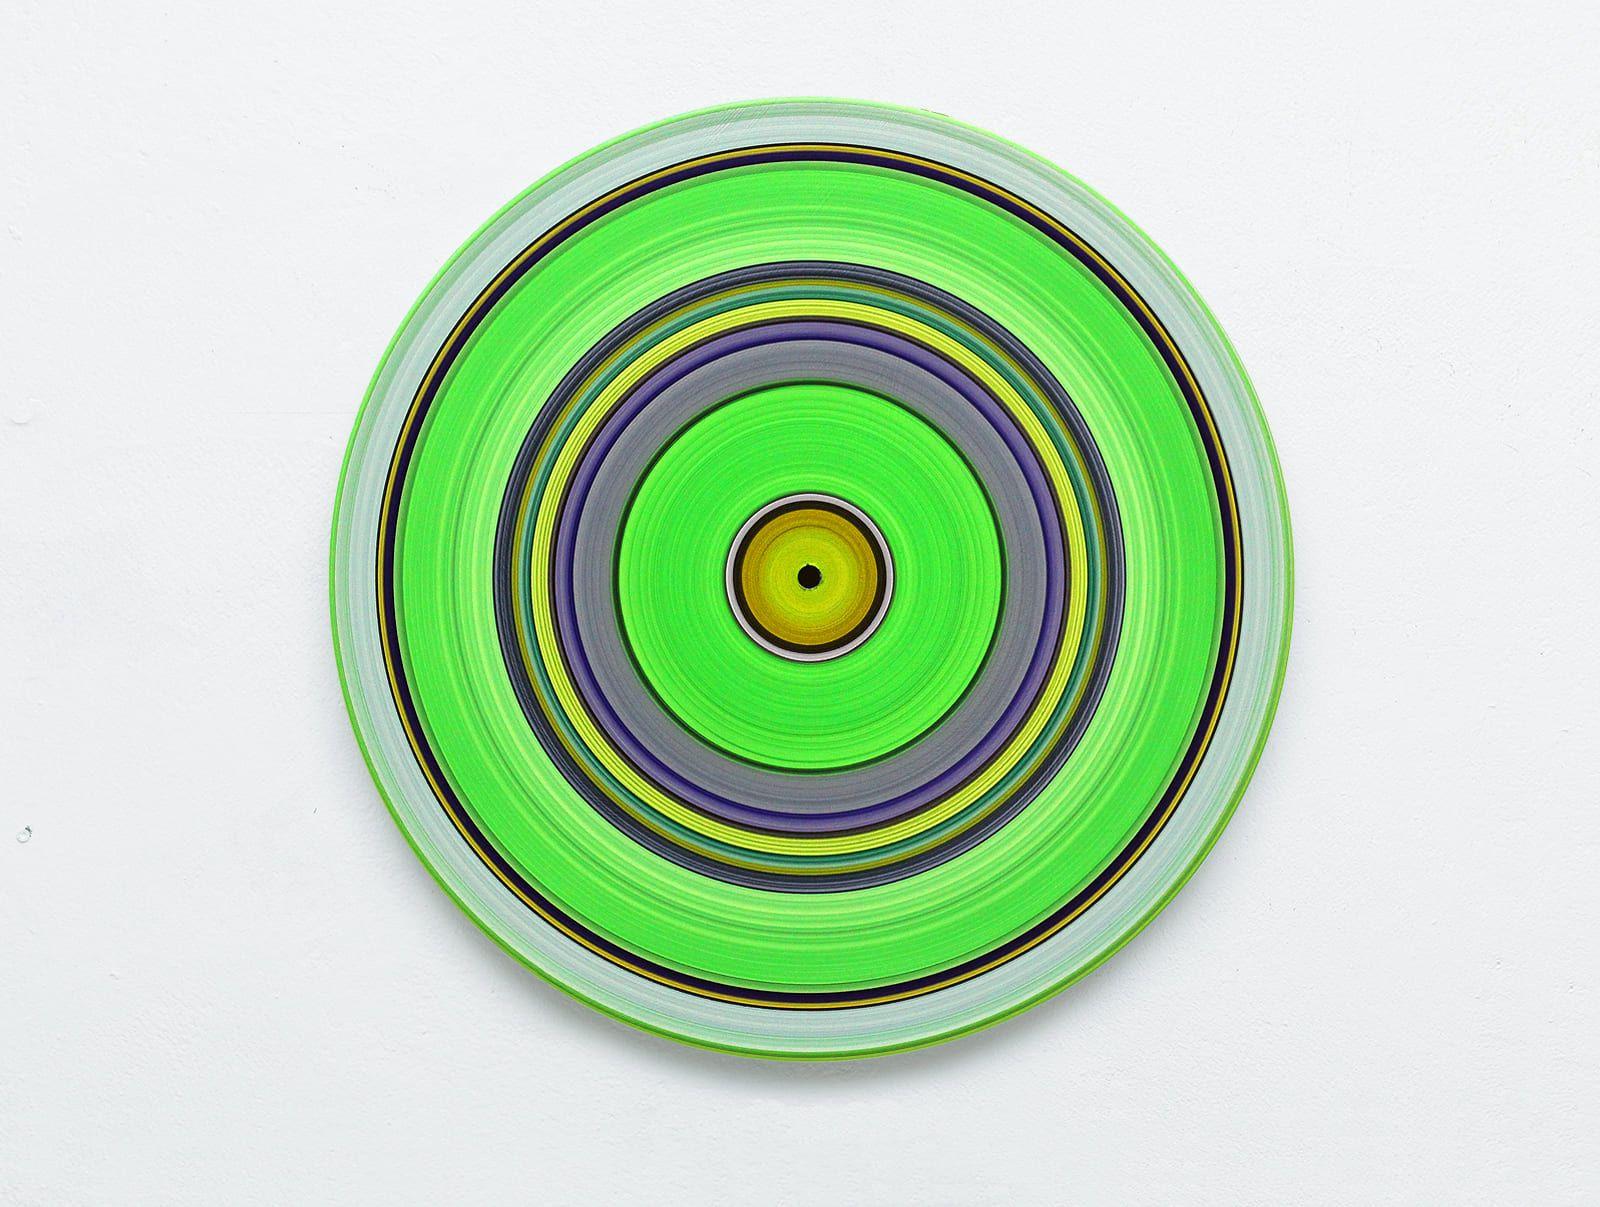 Doris Marten Abstract Painting - Green Edition No.12, Sound & Vision series by D. Marten - Painting on vinyl